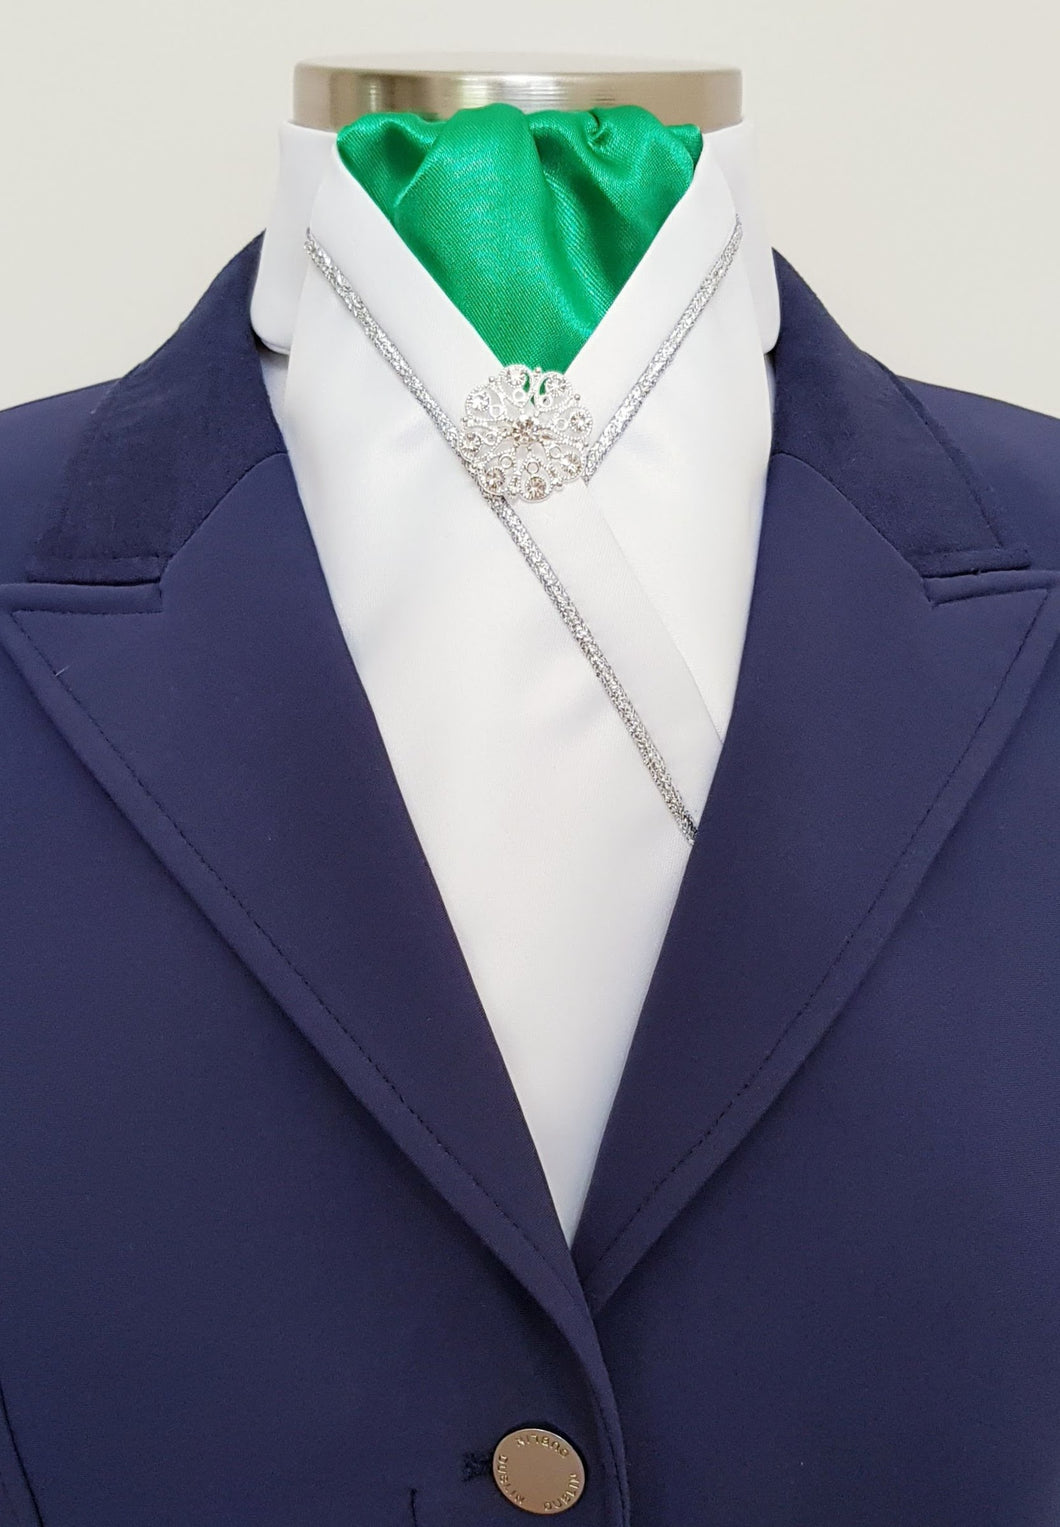 ERA KATE STOCK TIE - White satin, apple green with silver piping & brooch